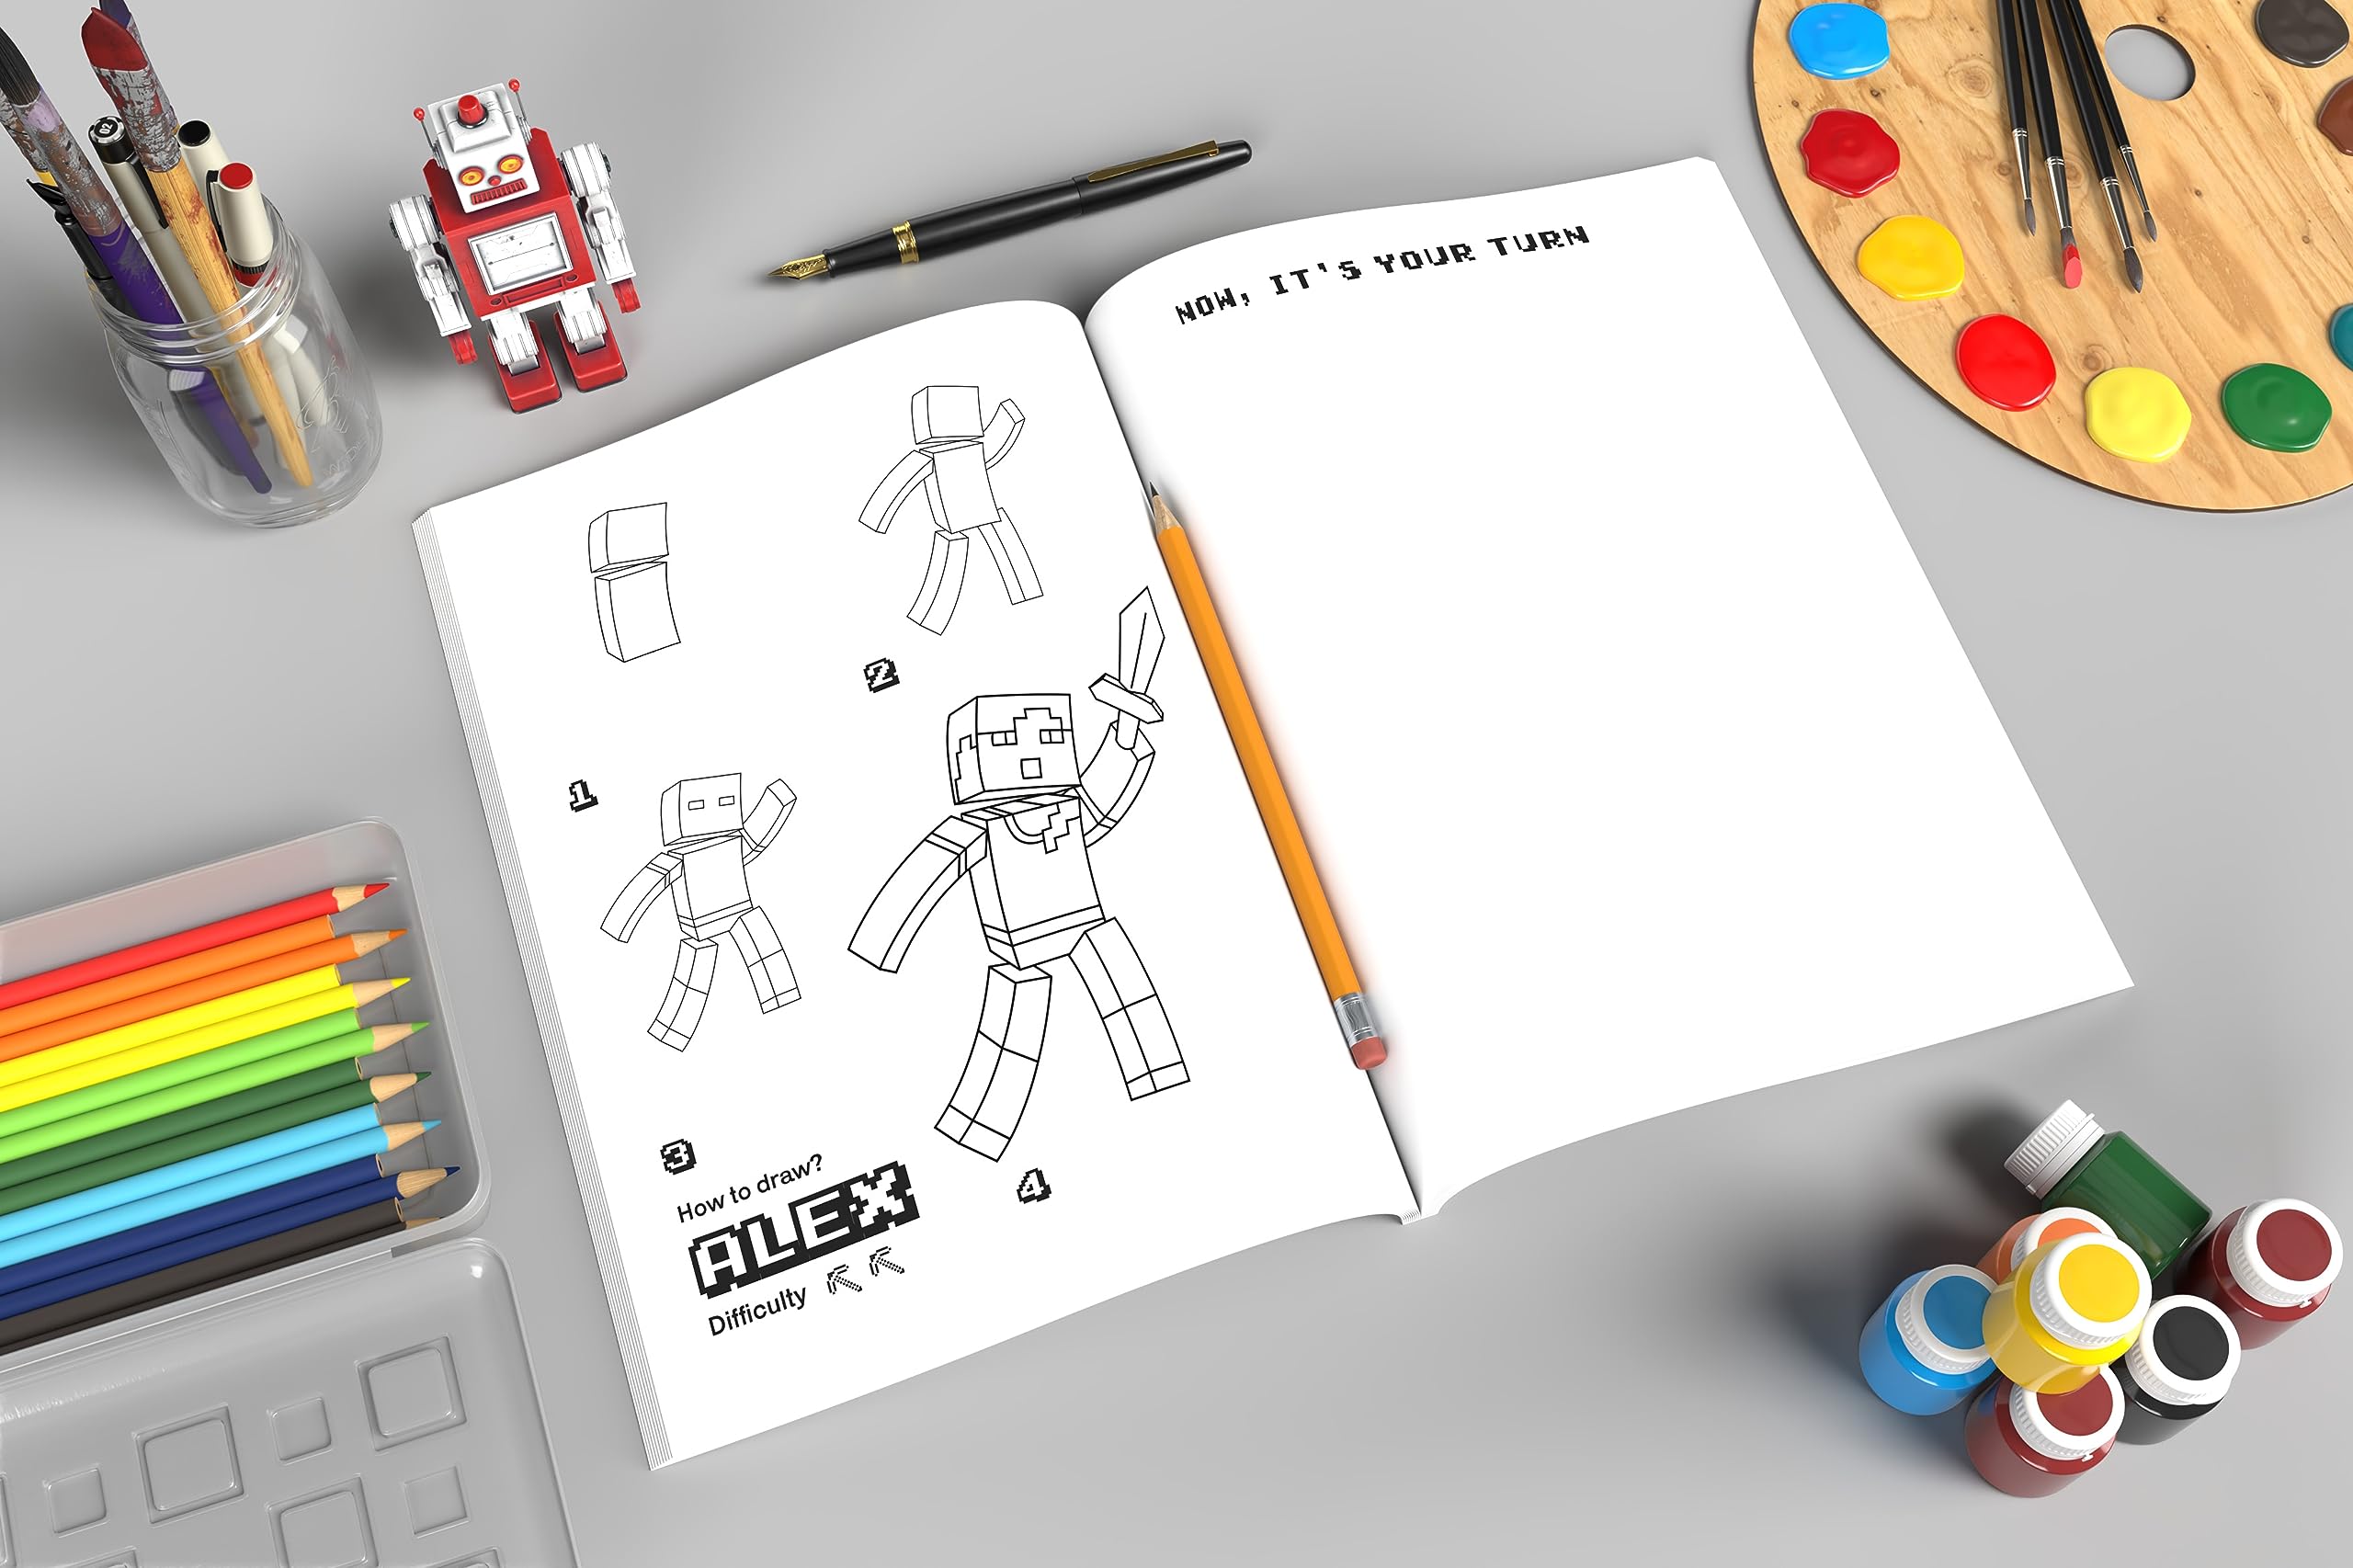 How To Draw for Minecrafter: Crafting Creativity A Step-by-Step Guide to Drawing for Minecrafter Enthusiasts (Unofficial Minecraft Activity Book for Kids)